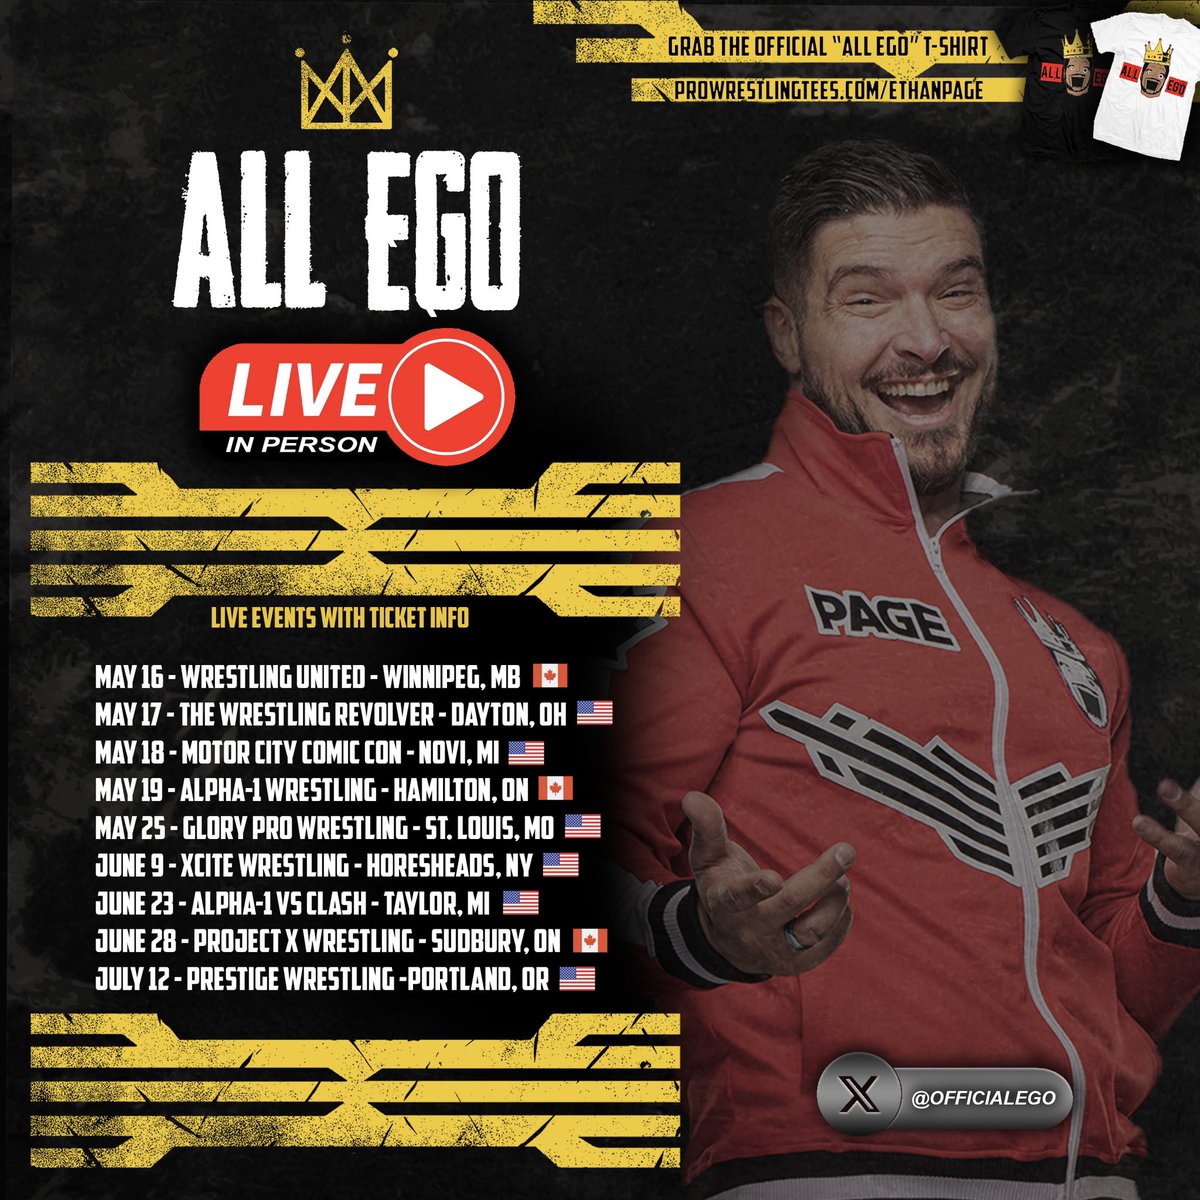 Get your tickets to see #AllEgo LIVE!